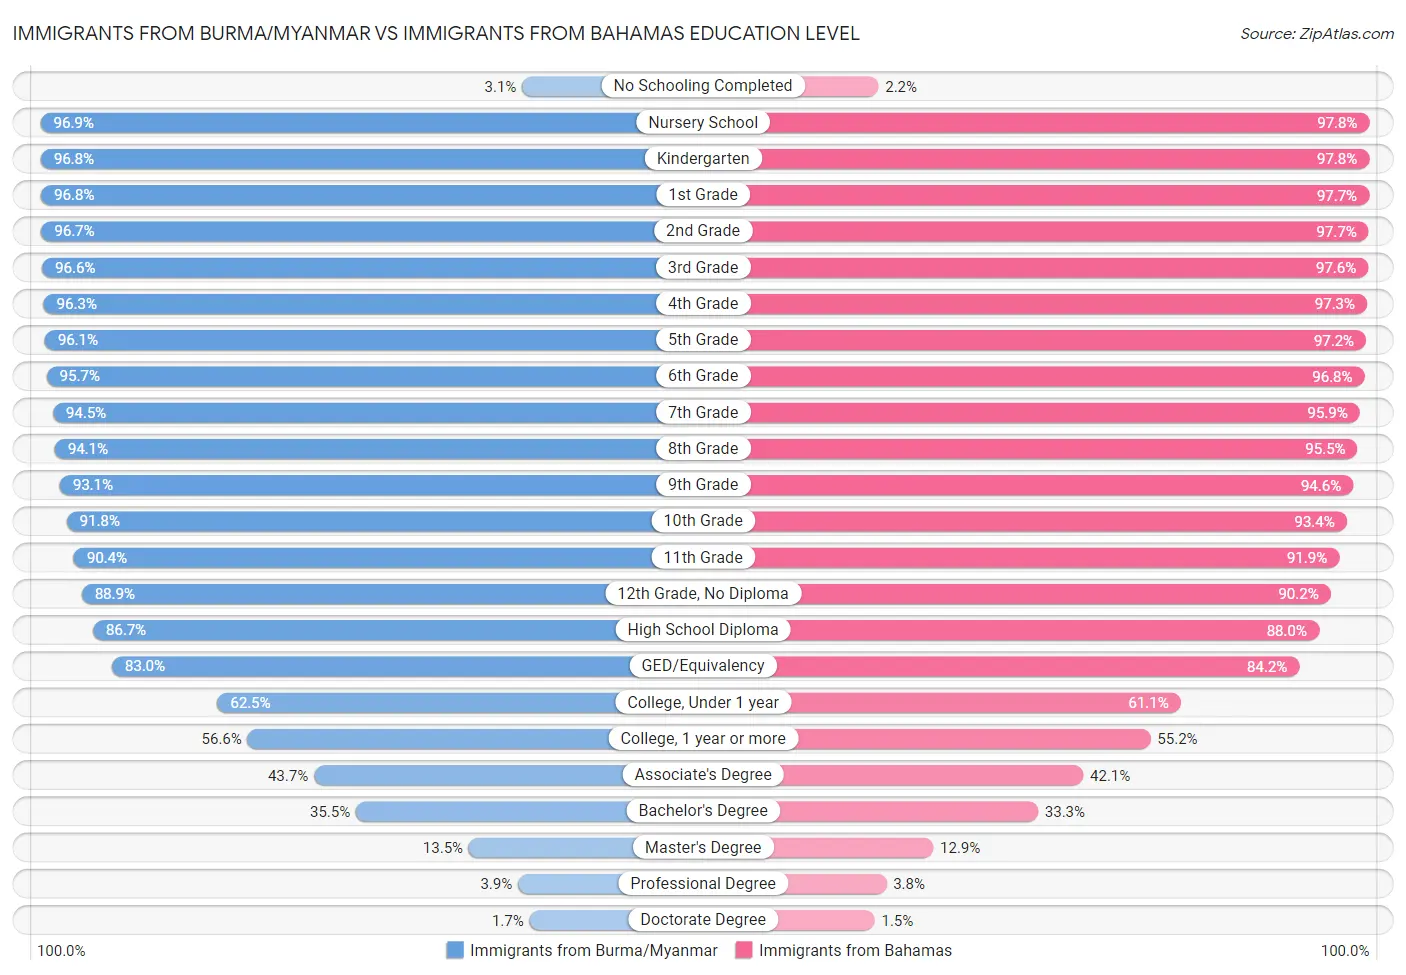 Immigrants from Burma/Myanmar vs Immigrants from Bahamas Education Level